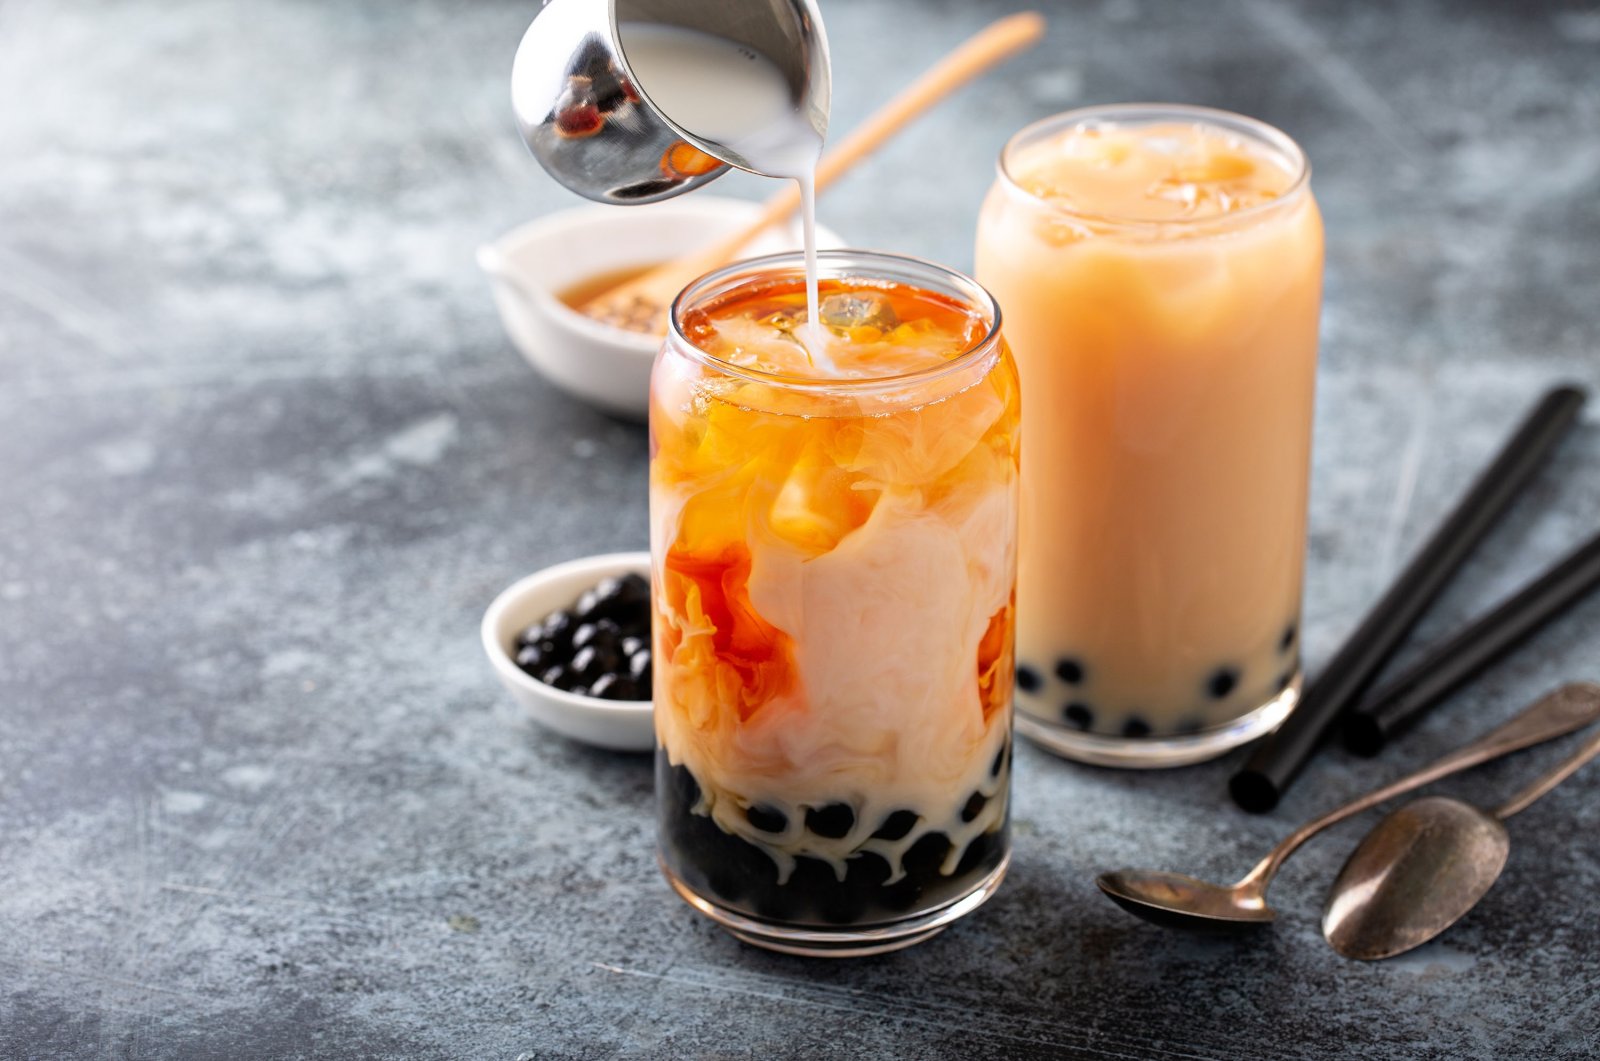 Pouring milk into the bubble tea and seeing it marble into perfection might be the most satisfying part of making your own bubble tea. (Shutterstock Photo)